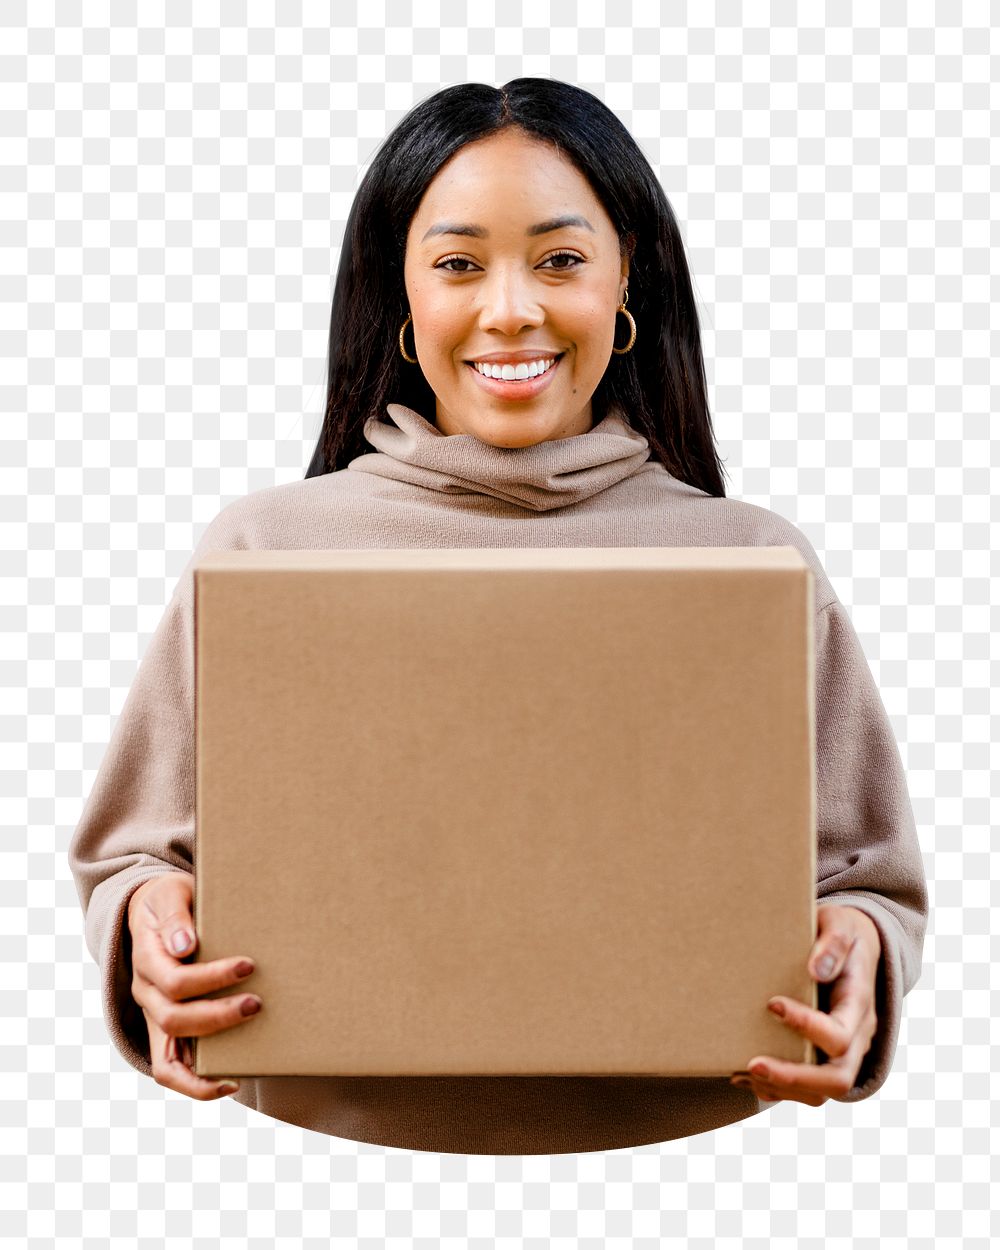 Png woman carrying box sticker, transparent background